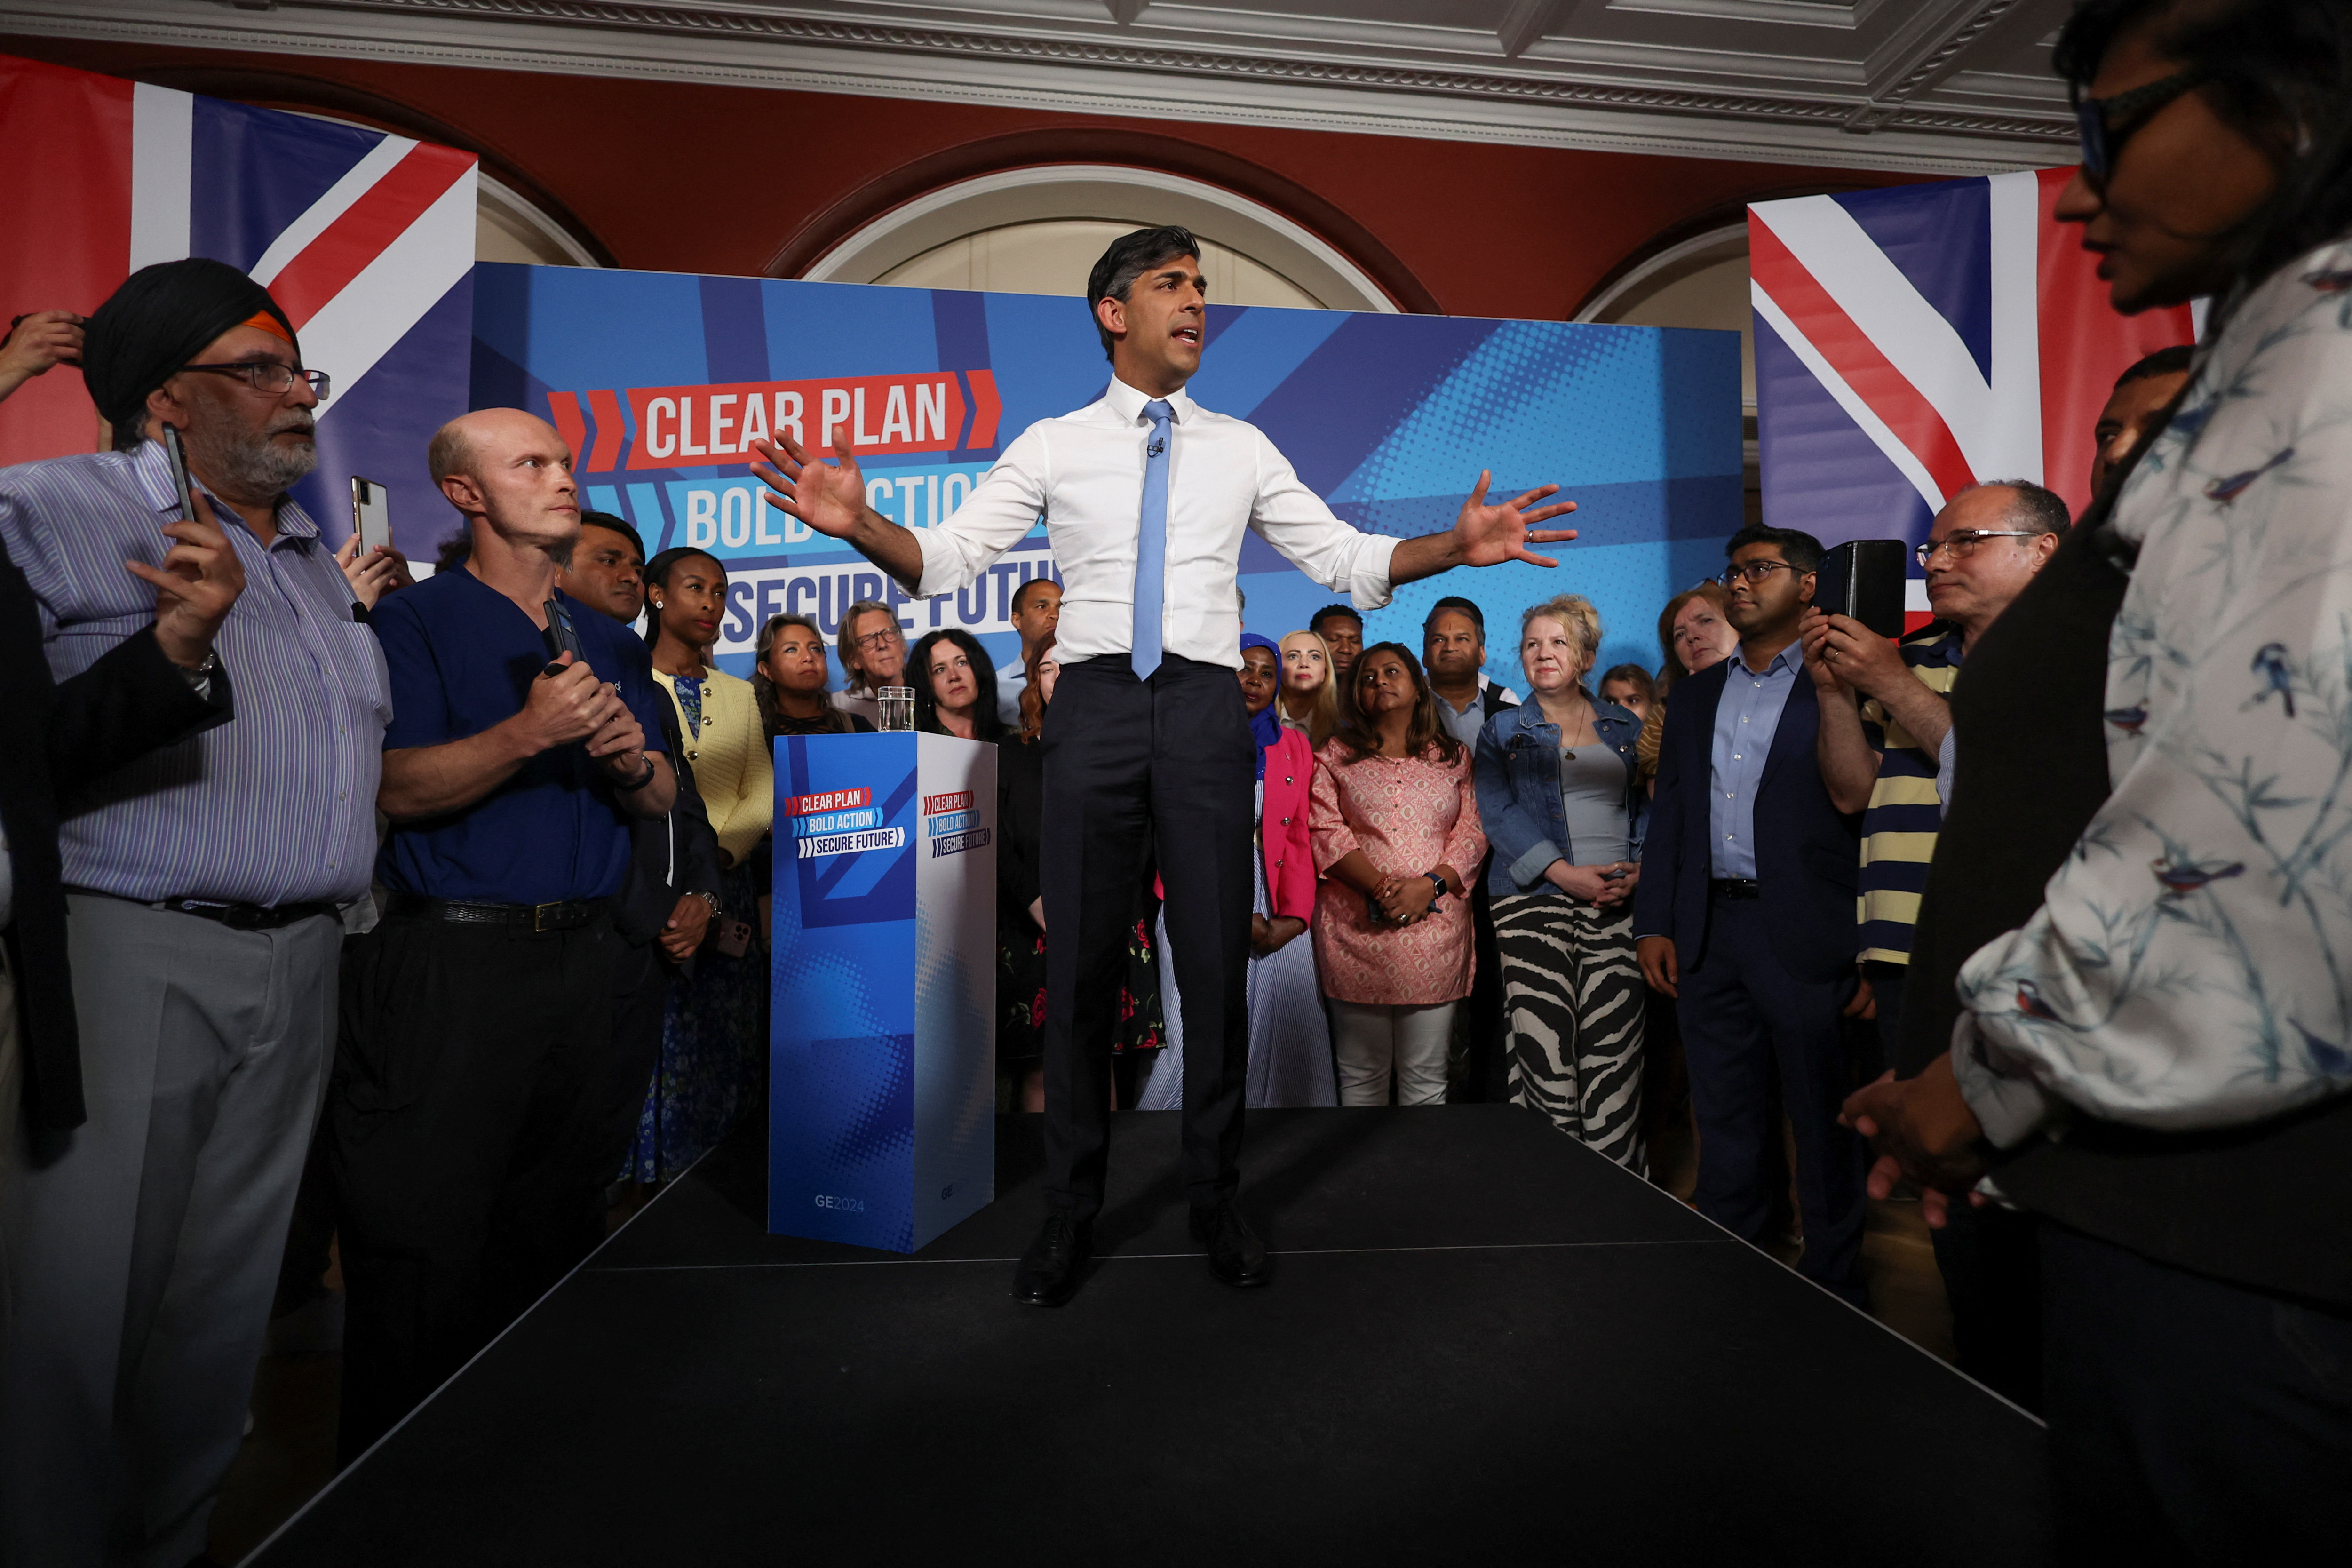 British PM Sunak attends a Conservative general election campaign event, in London